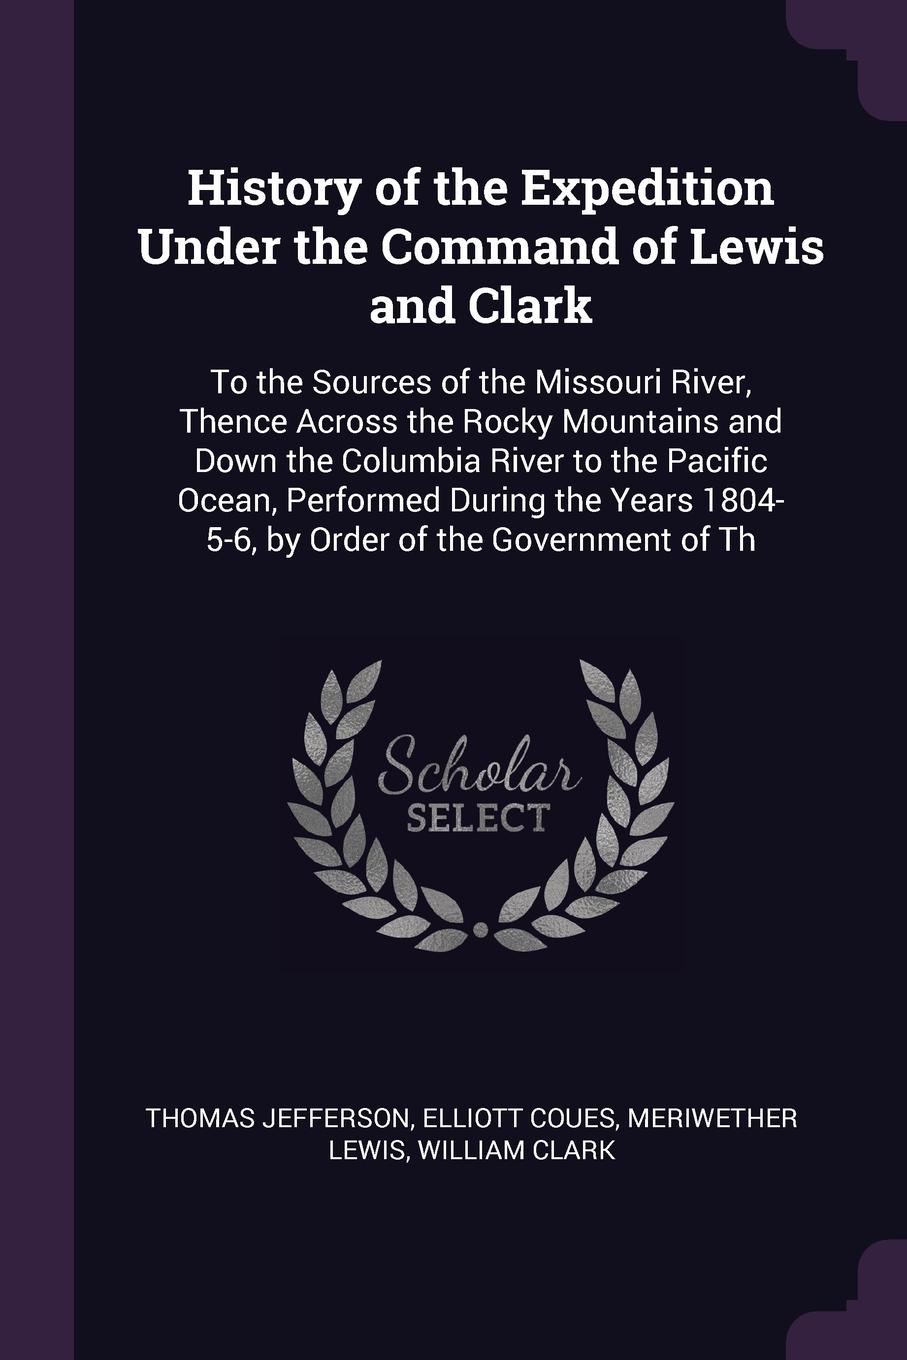 History of the Expedition Under the Command of Lewis and Clark. To the Sources of the Missouri River, Thence Across the Rocky Mountains and Down the Columbia River to the Pacific Ocean, Performed During the Years 1804-5-6, by Order of the Governme...